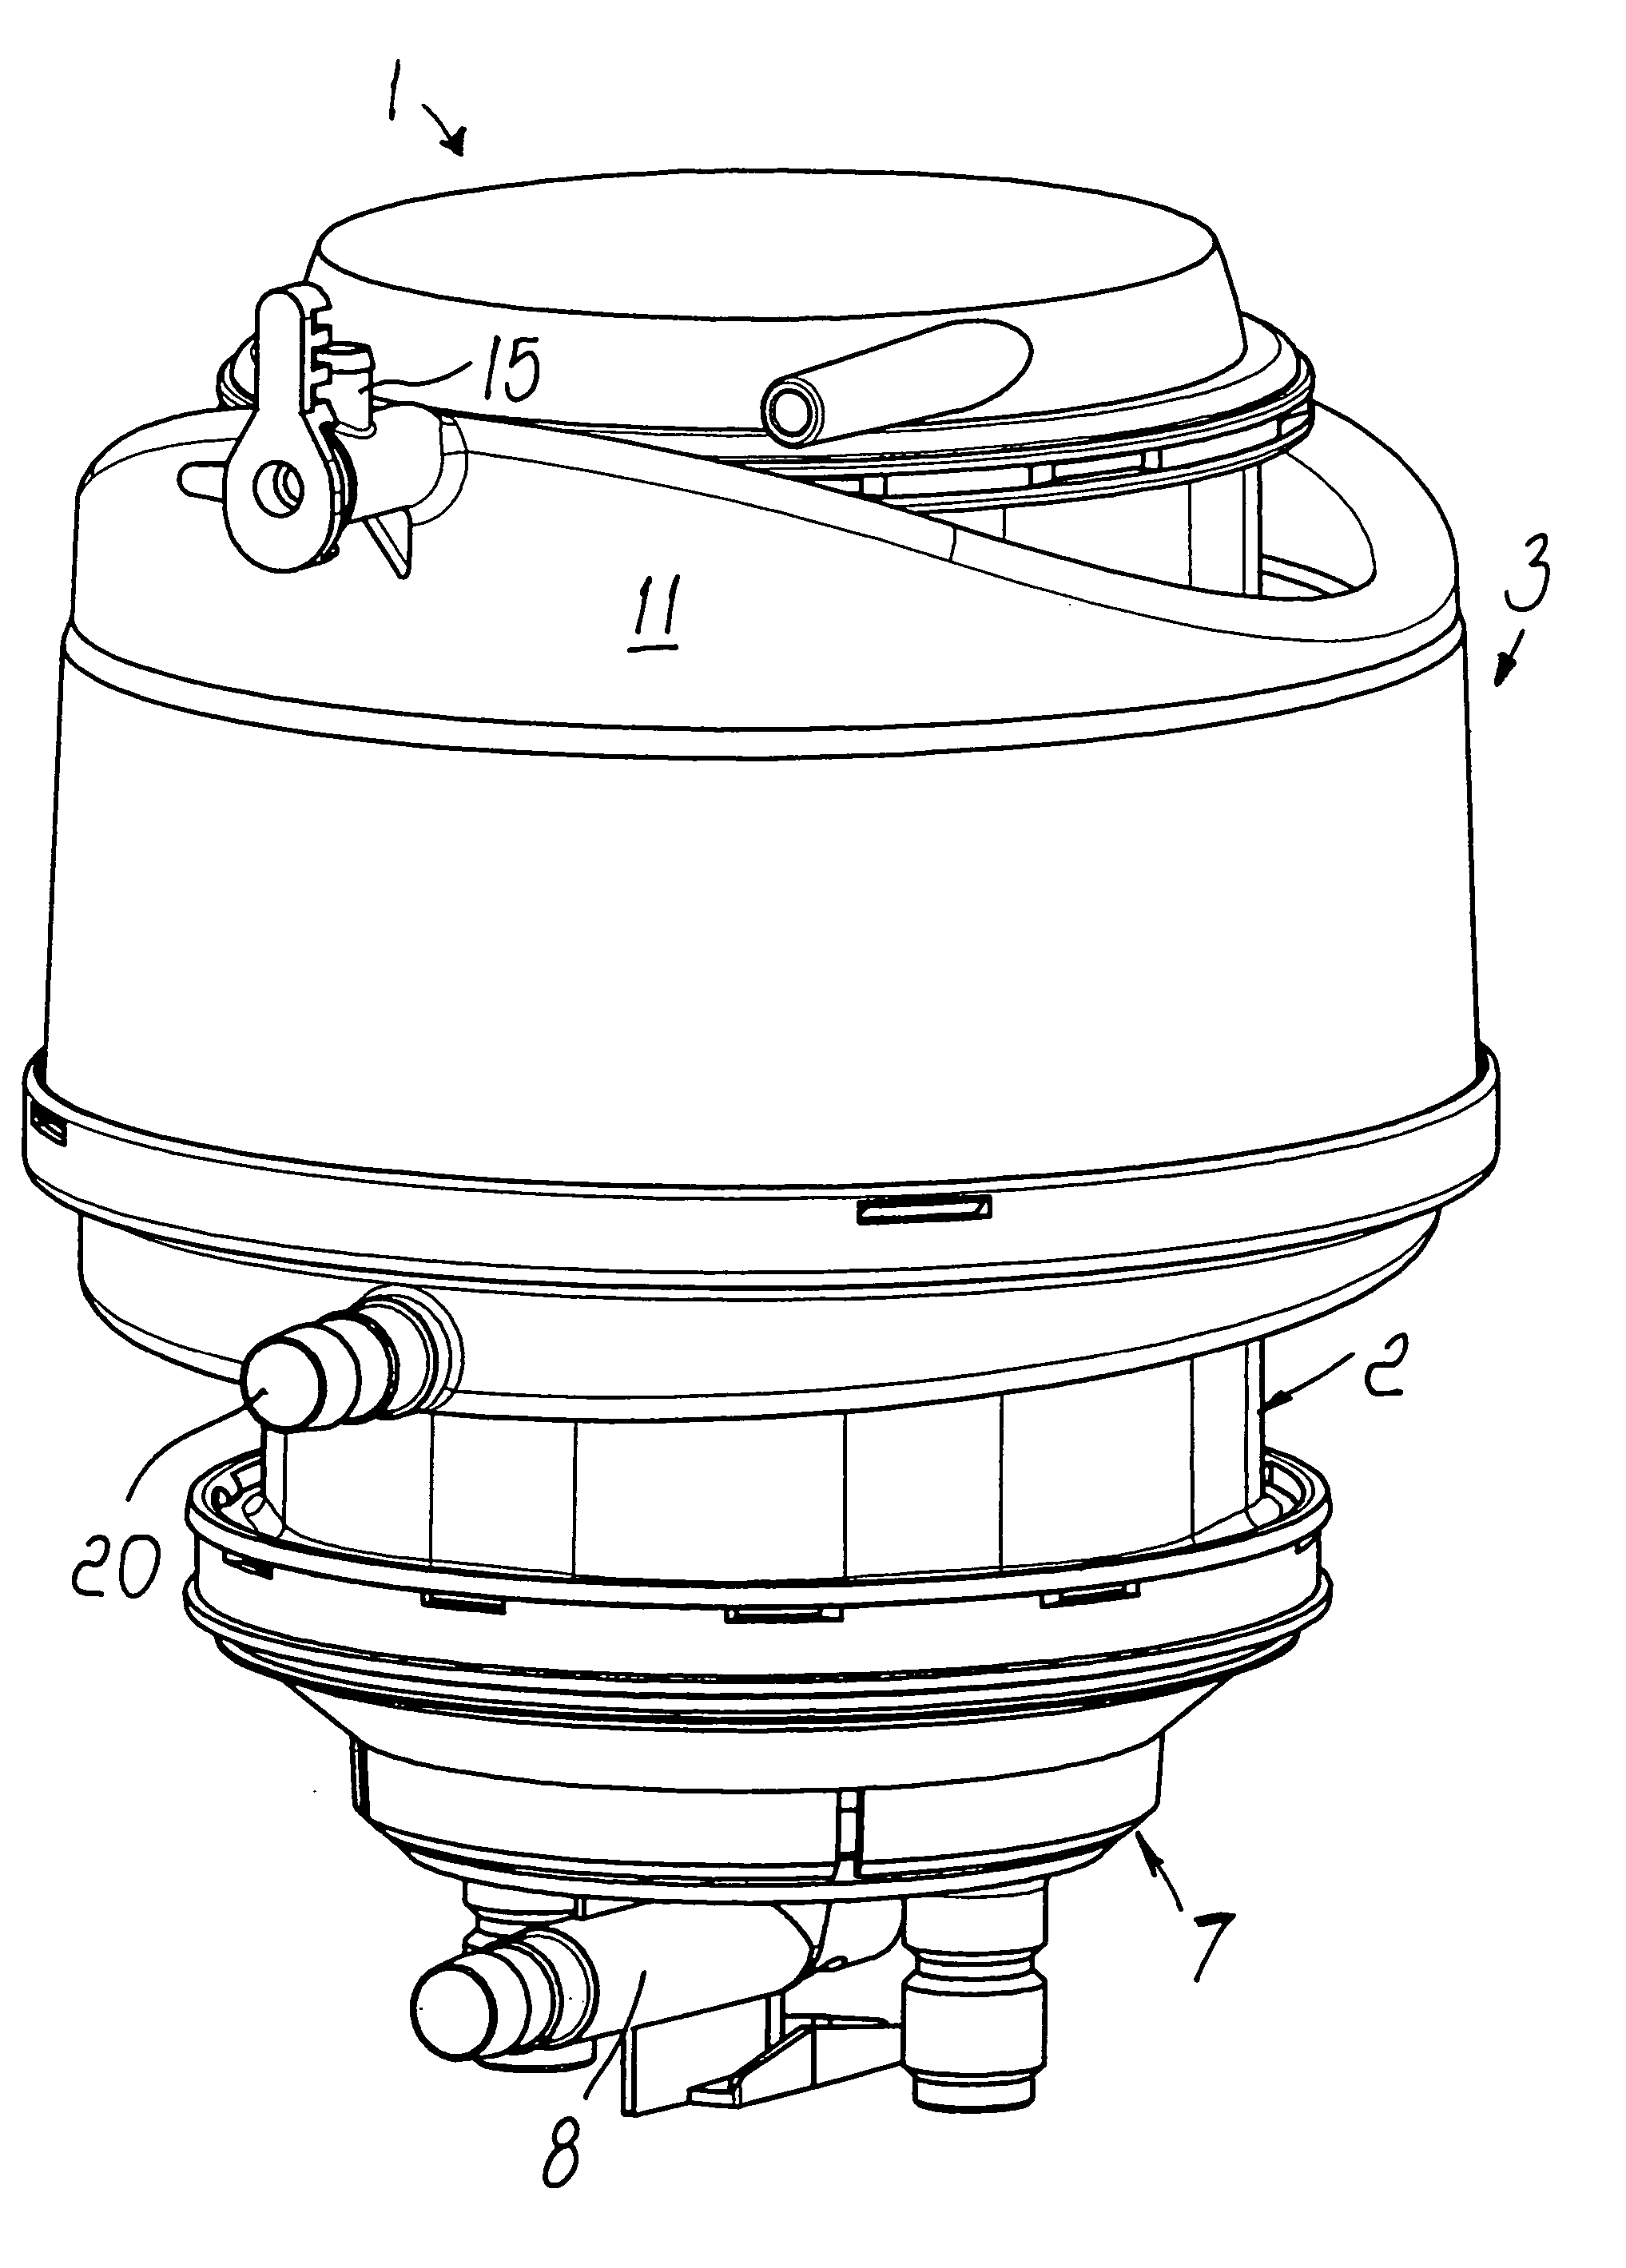 Device for oxygenating blood in an extracorporeal circuit